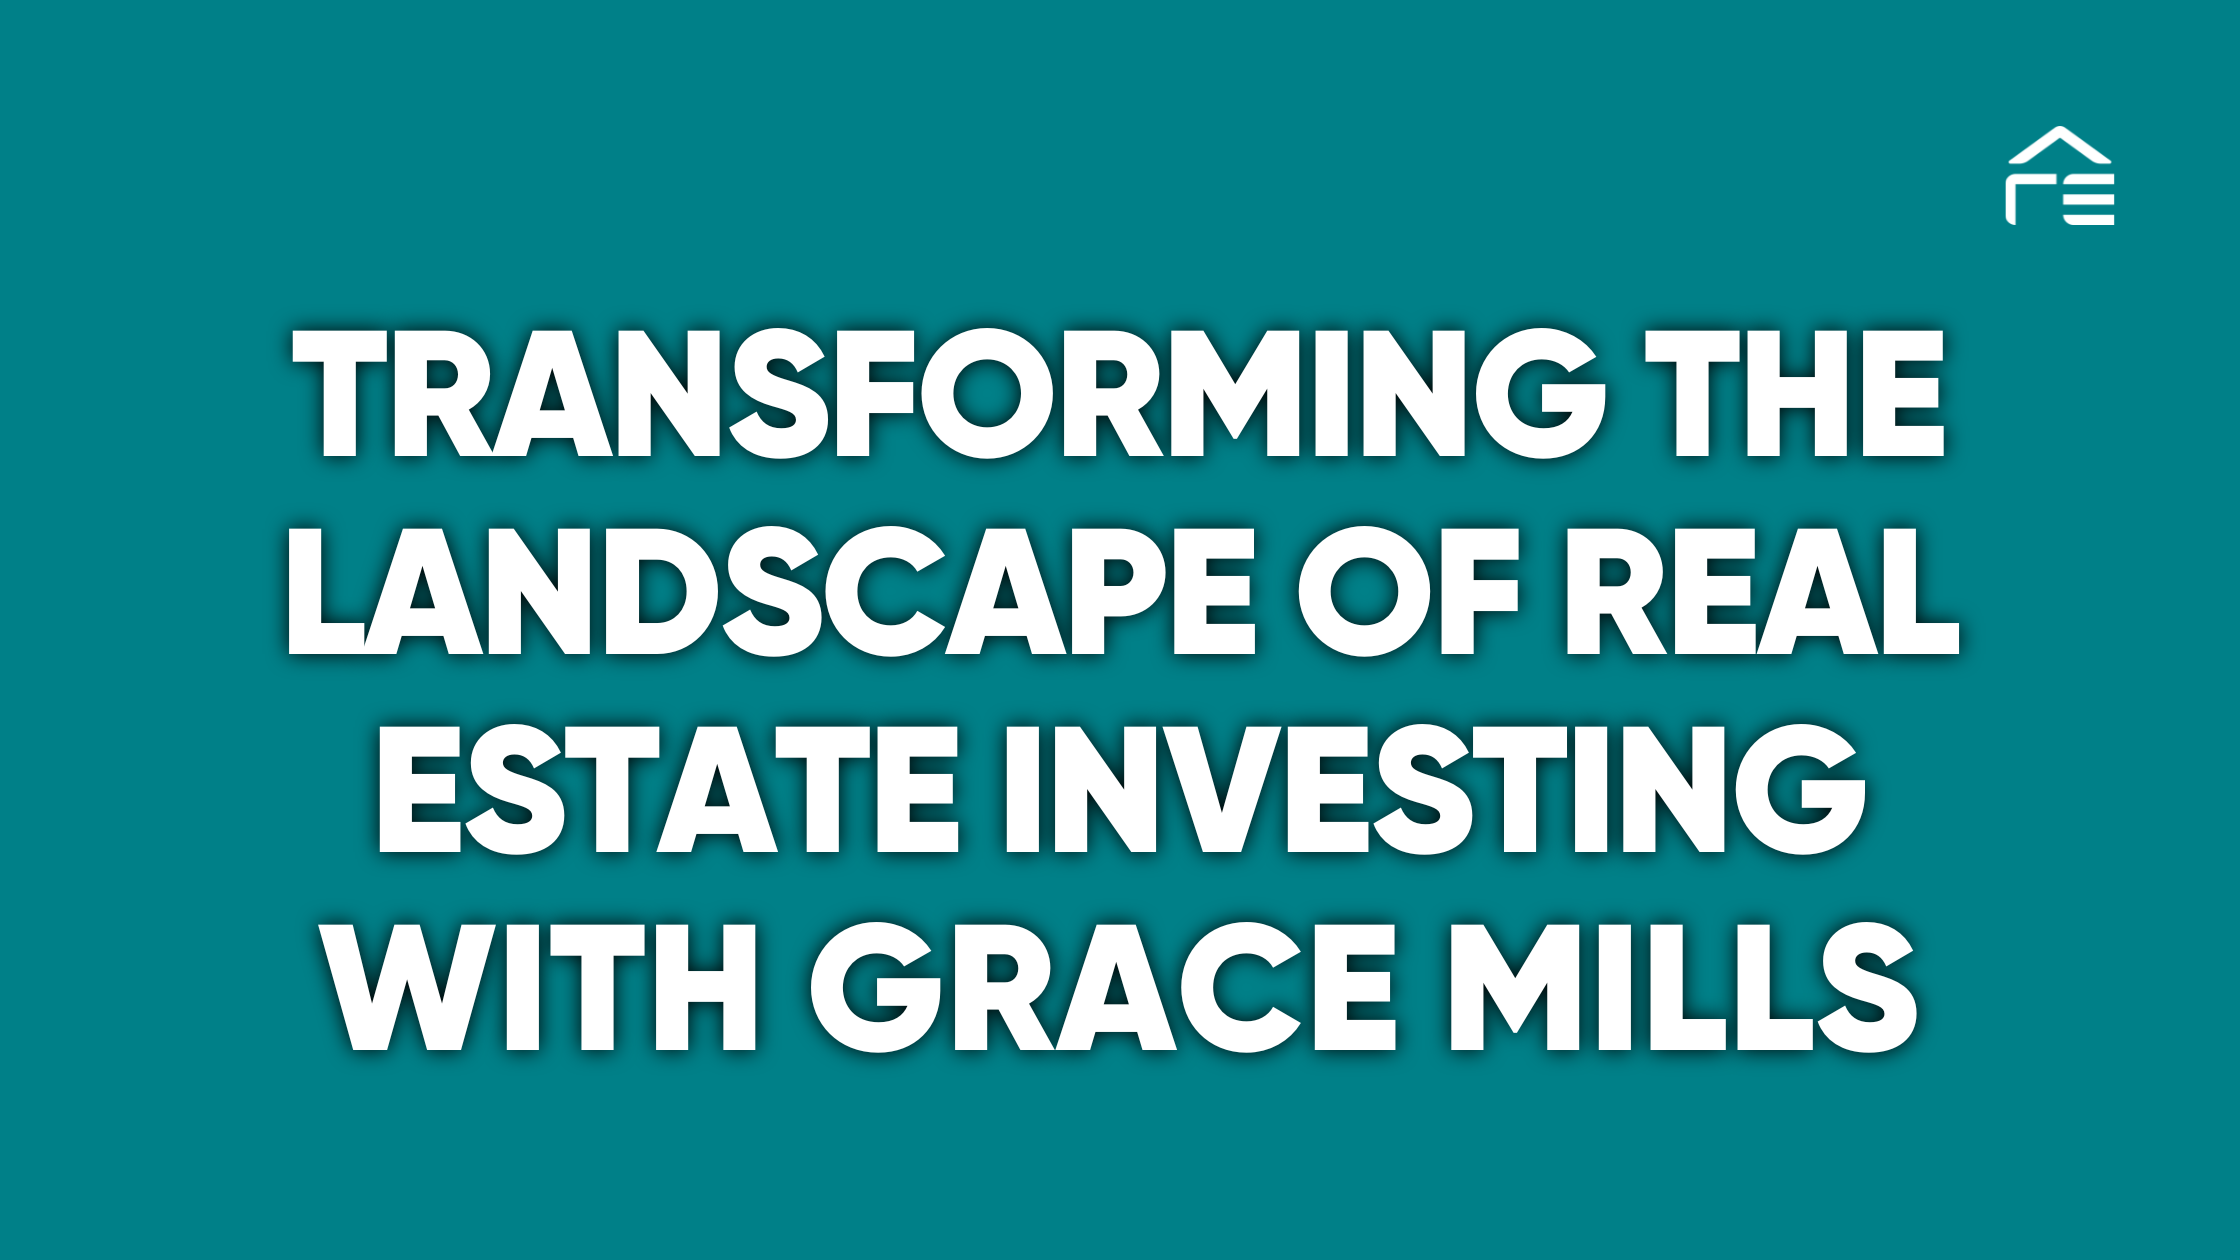 Grace Mills on Radio Advertising: Transforming the Landscape of Real Estate Investing